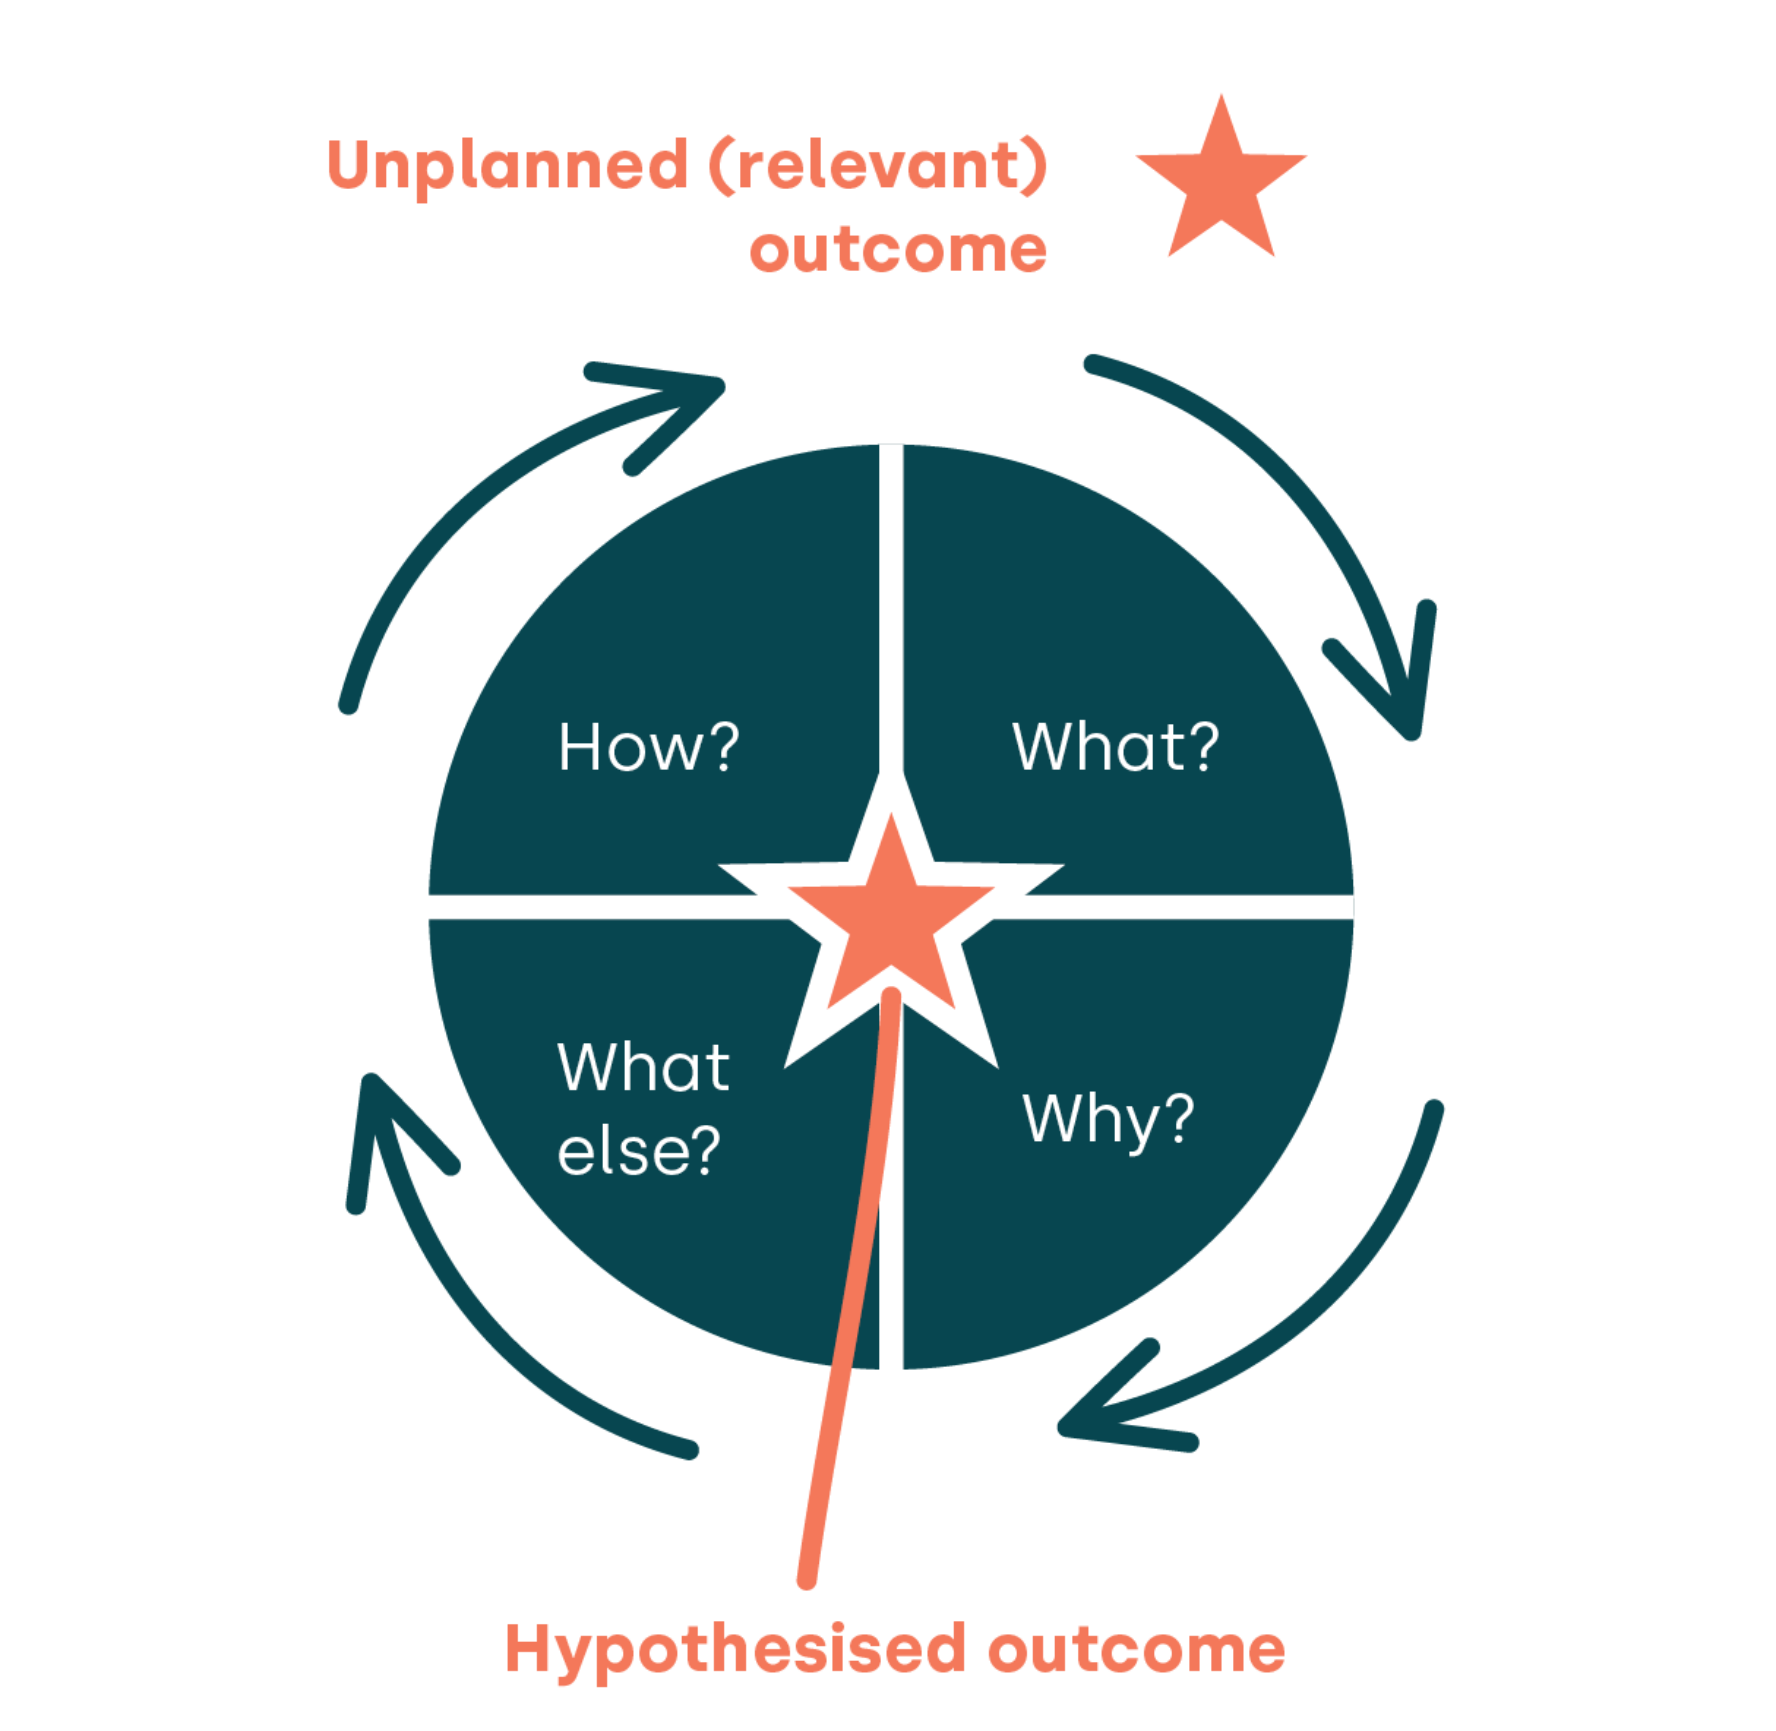 A circle, segmented into four parts, labelled: How? What? What else? Why? There are arrows indicating a circular motion around the circle. At the centre of the circle is a star, which is labelled 'hypothesised outcome'. At the top, outside of the circle is another star, labelled Unplanned (relevant) outcome.